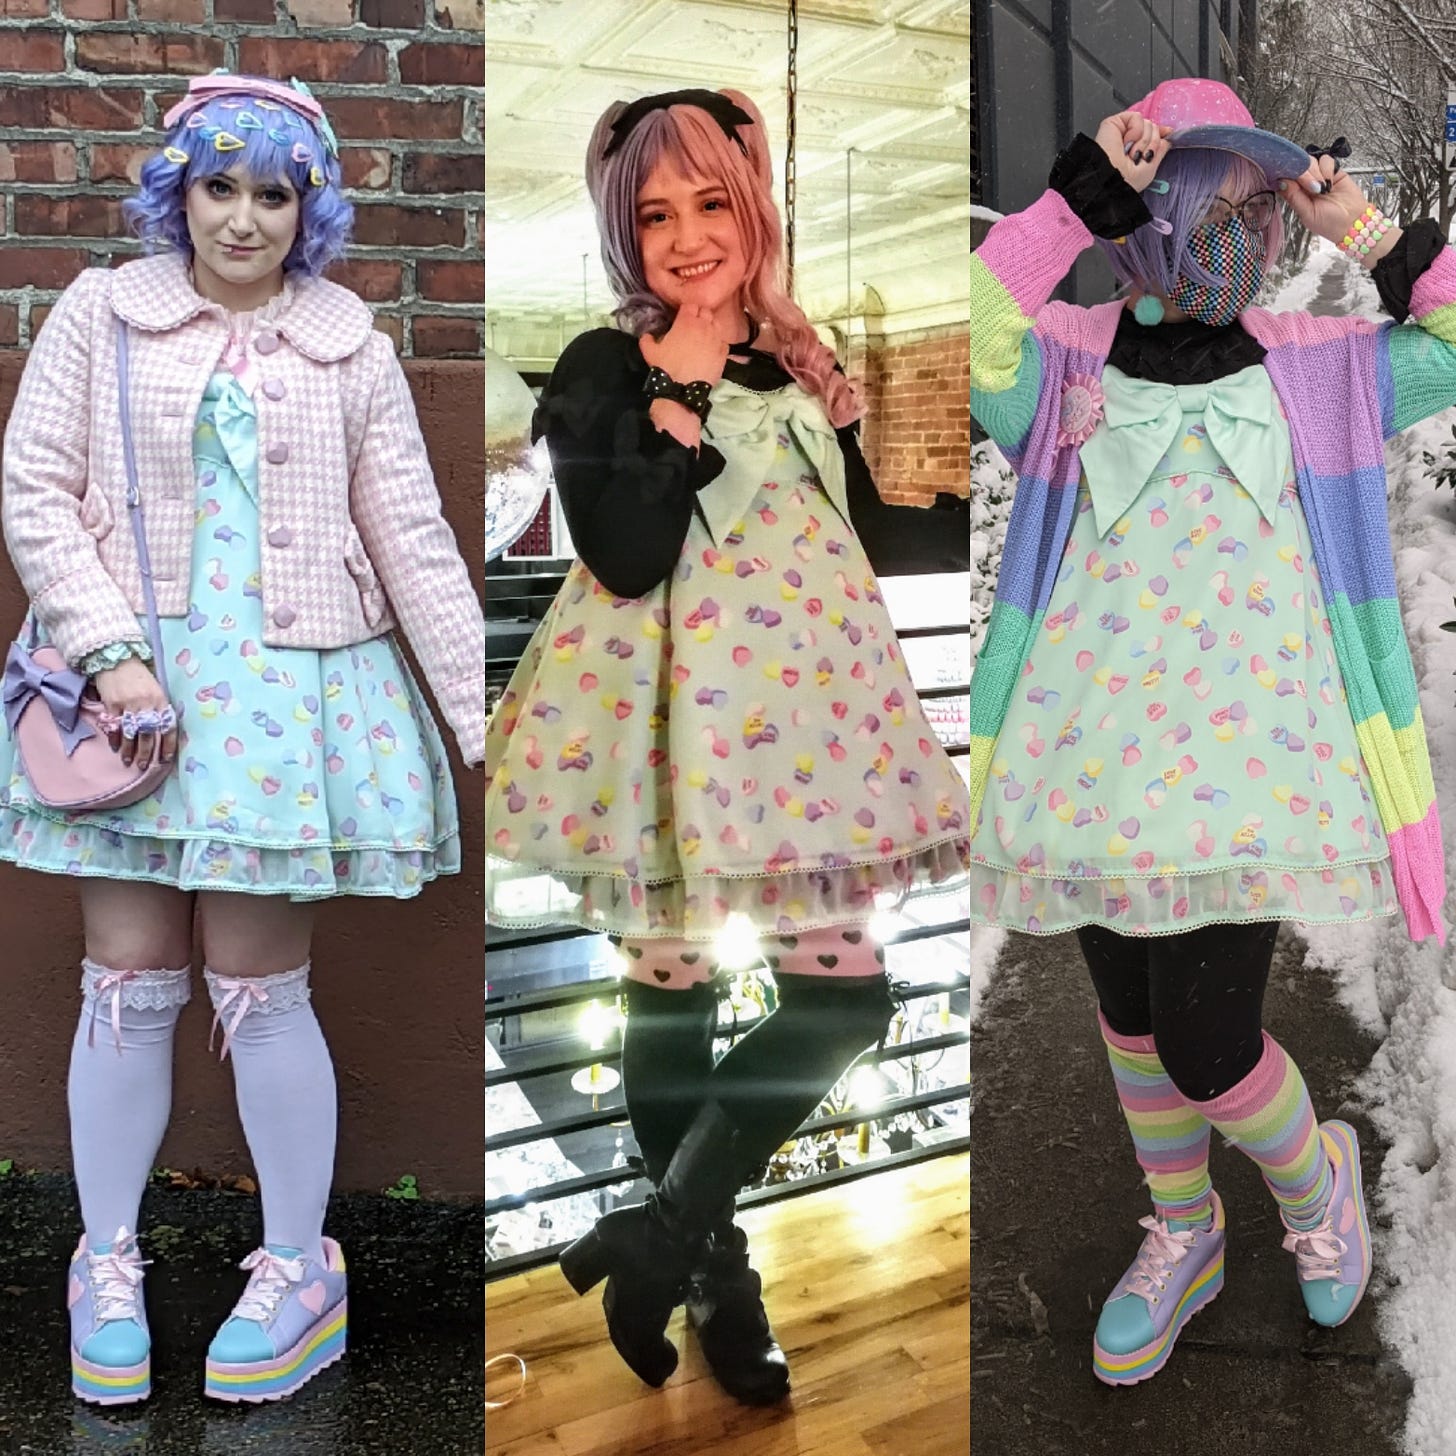 Nif (a white woman with brown/blonde hair) shown three times wearing different coordinates with Angelic Pretty's Sugar Hearts JSK in mint. The first picture is meant to evoke 2010-era sweet coordinates. The second picture, Nif coordinated the dress with all black pieces. In the third picture, Nif is wearing black and pastel rainbow pieces with the dress. 